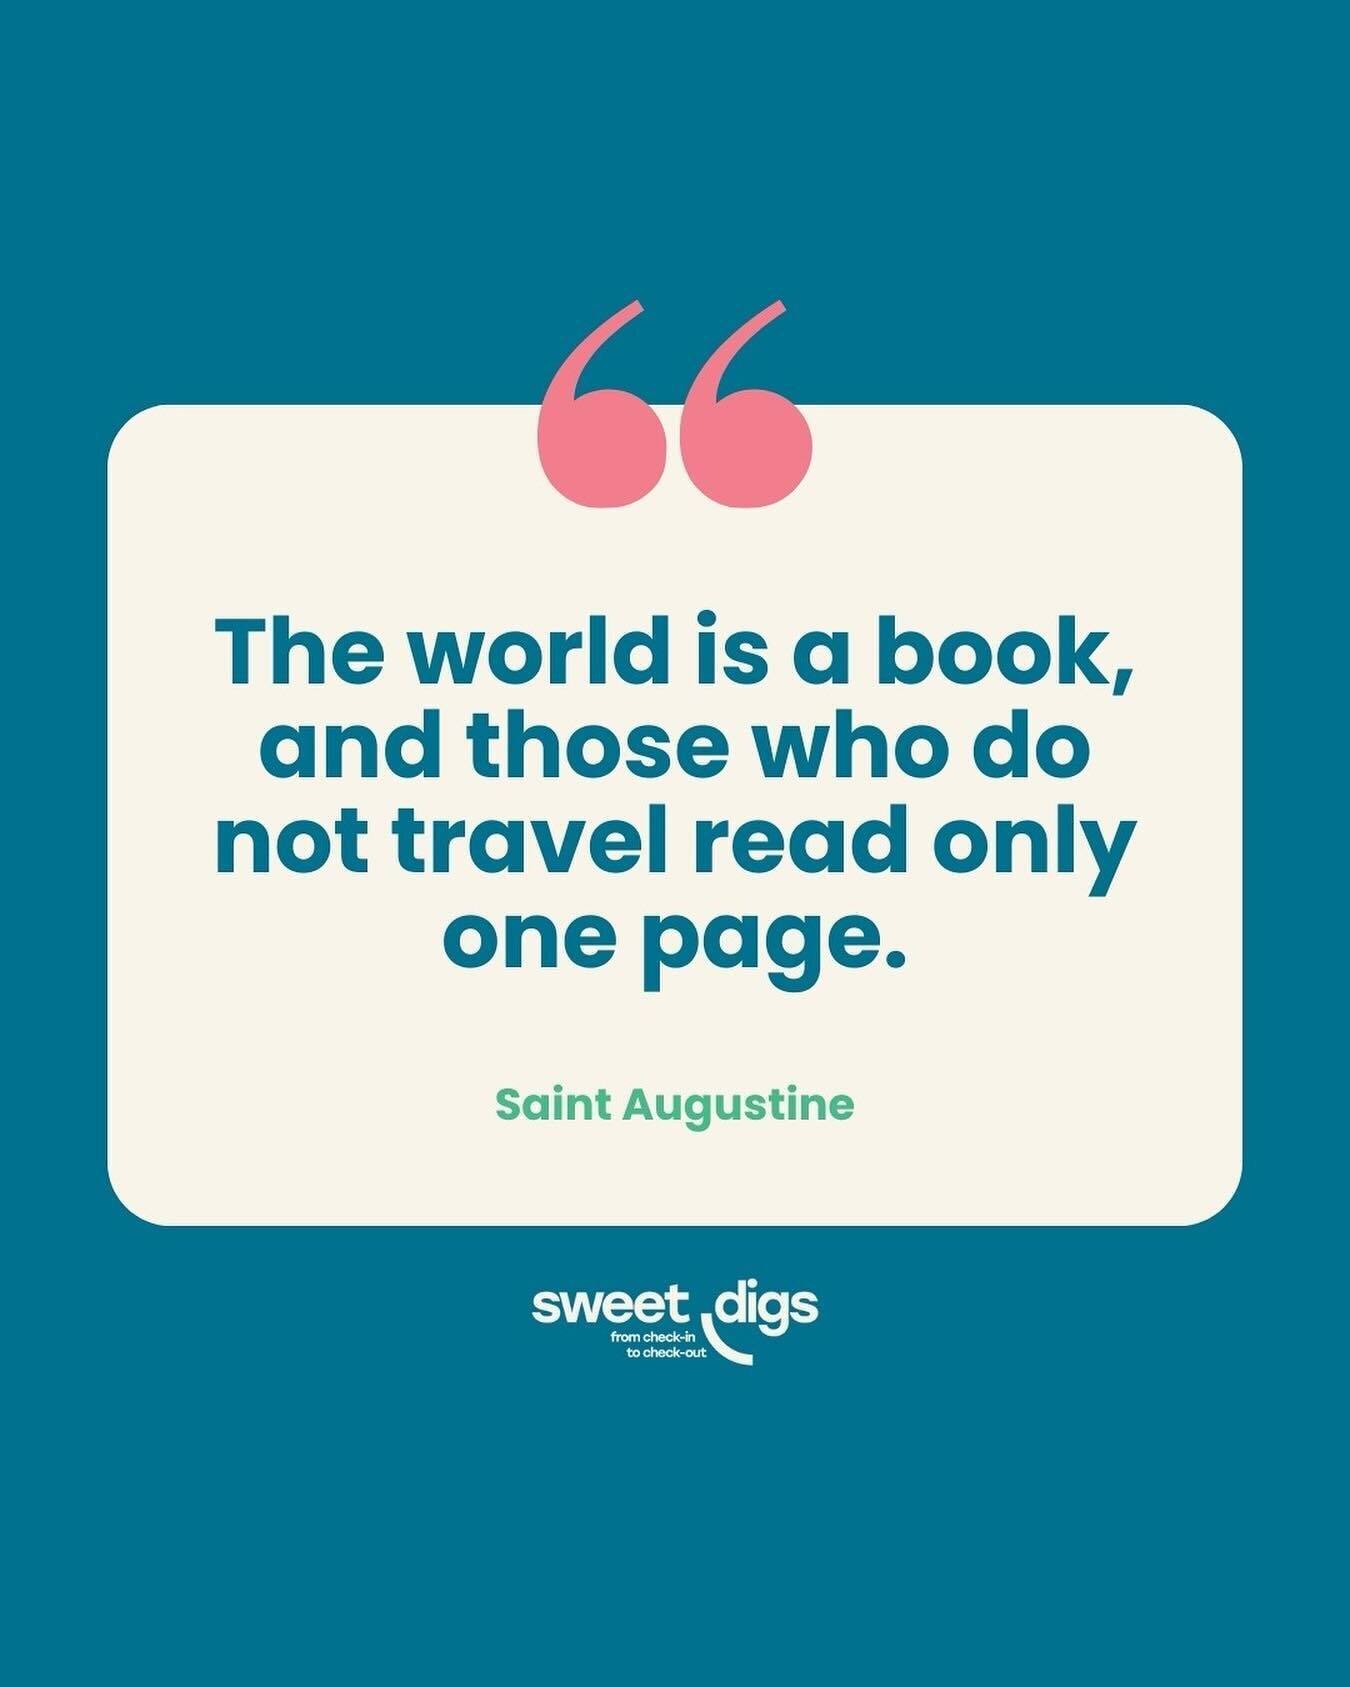 Explore new pages and uncover fresh stories with Sweet Digs!📚
⠀⠀⠀⠀⠀⠀⠀⠀⠀
Where have you recently travelled? Whether you venture far and wide or plan multiple staycations a year, our Sweet Digs make for the perfect retreat. Returning after a day of ad